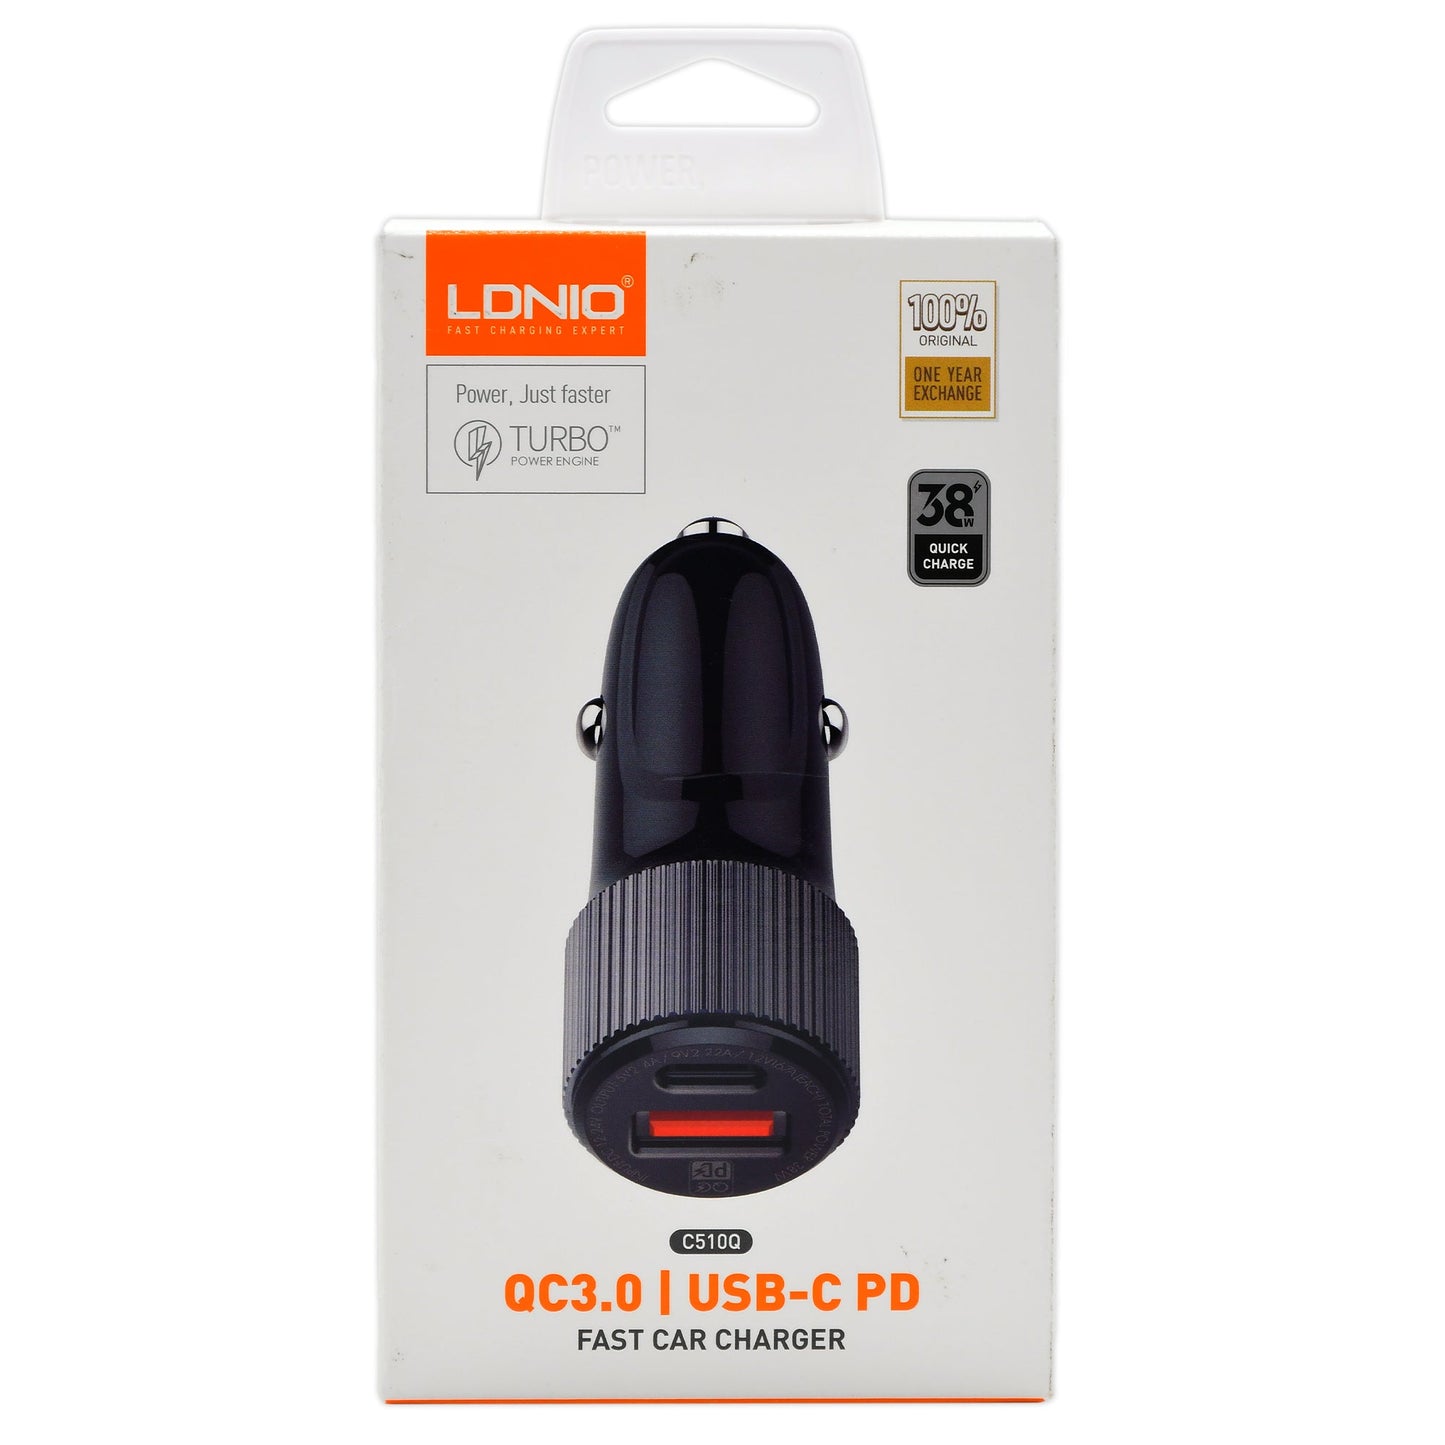 
                  
                    LDNIO C510Q Turbo Power Engine Car Charger - Grey-CHARGER-LDNIO-WITH 1M LIGHTING CABLE-CARPLUS
                  
                